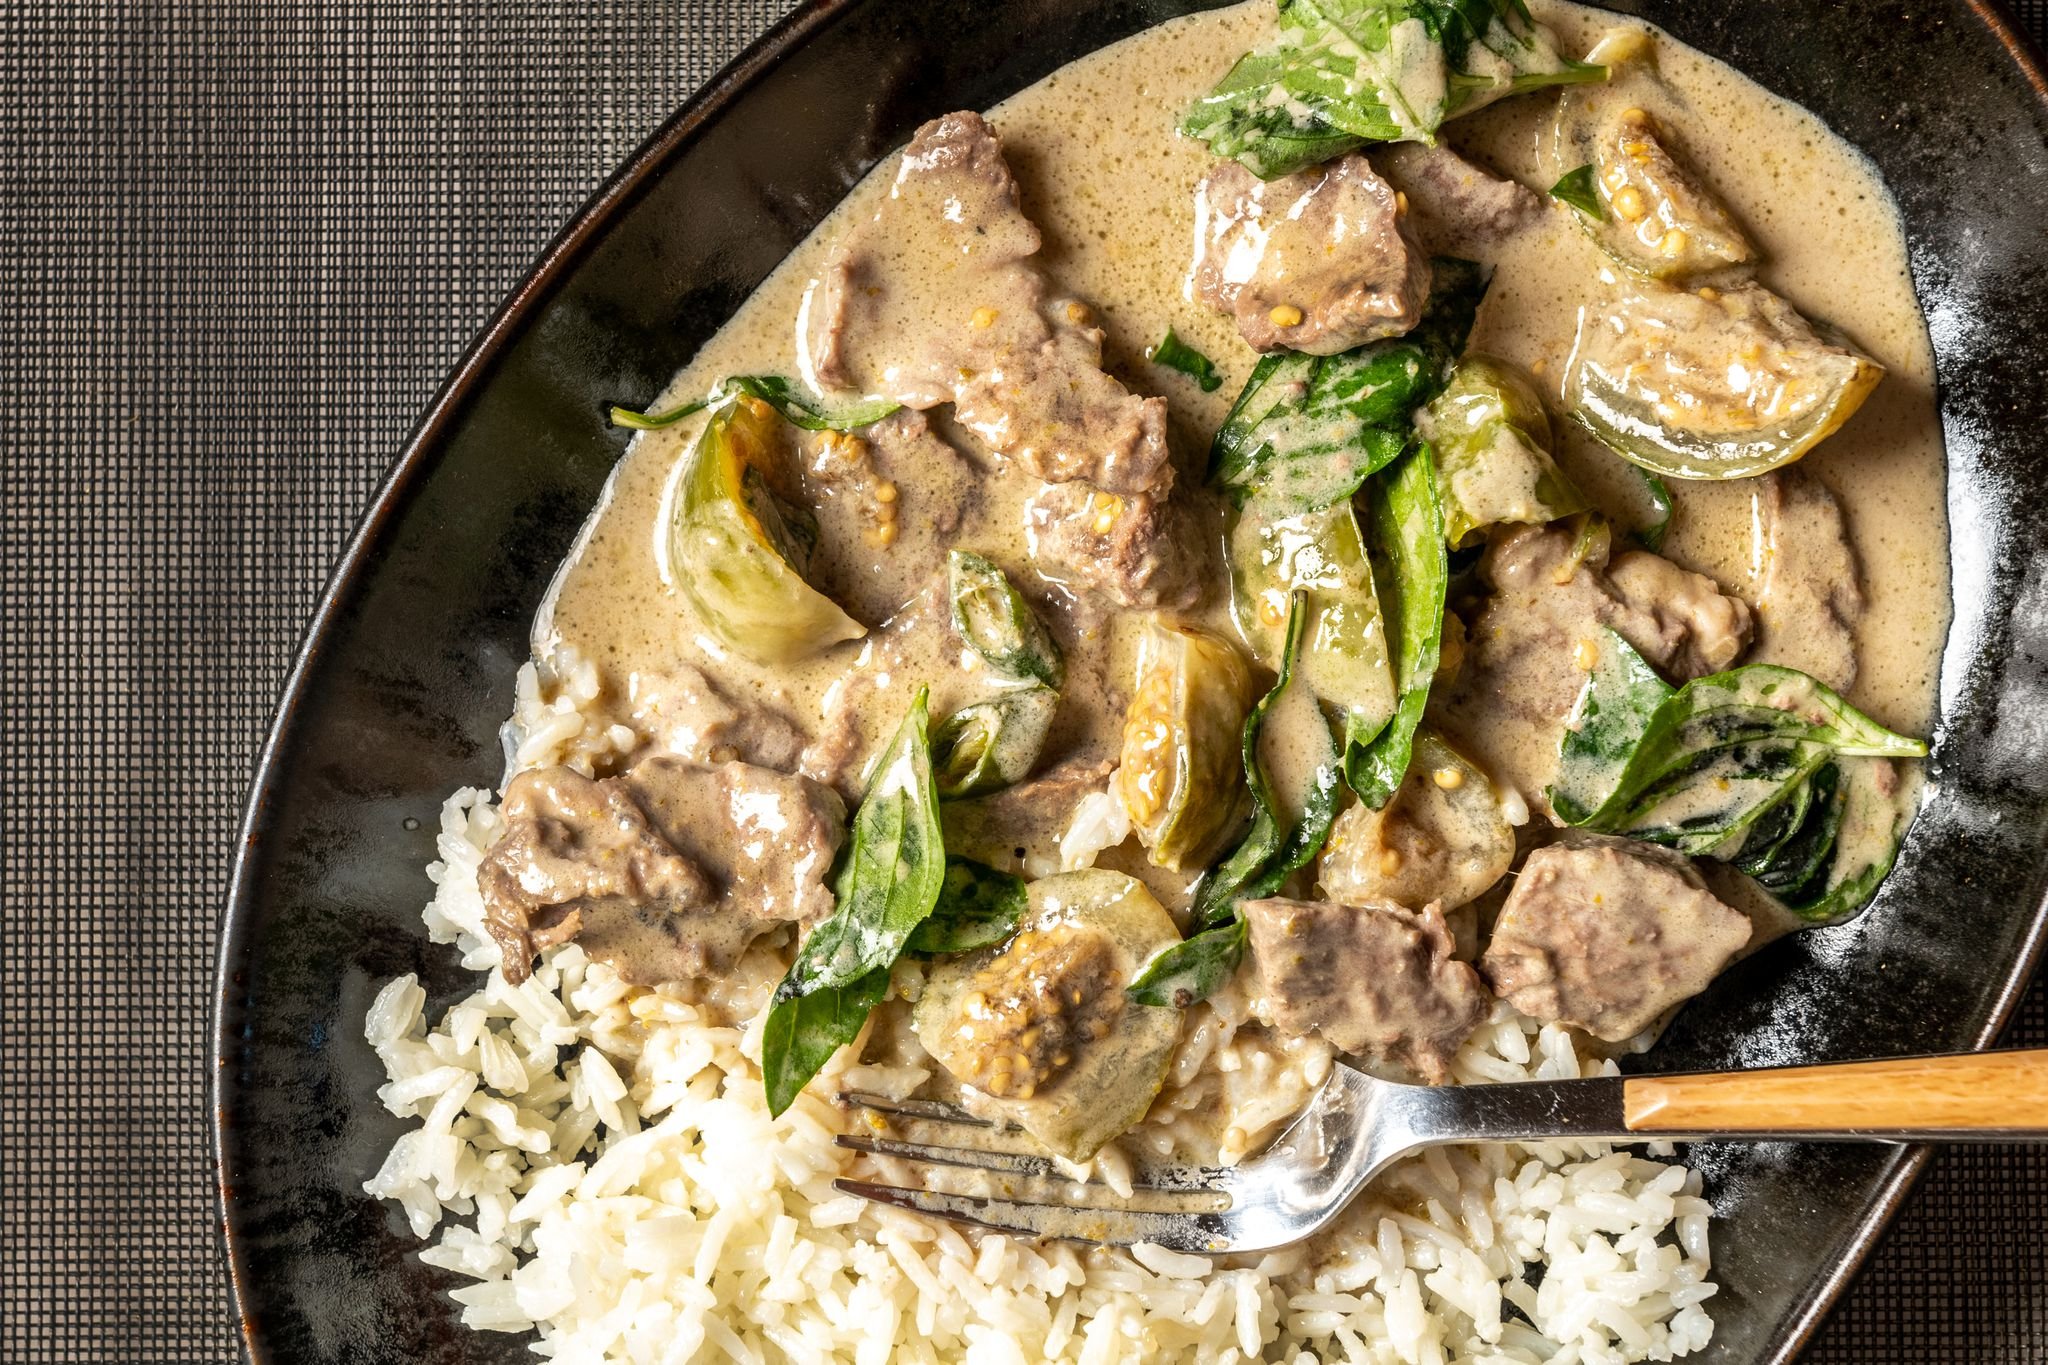 This Thai green curry with beef is all about the sauce